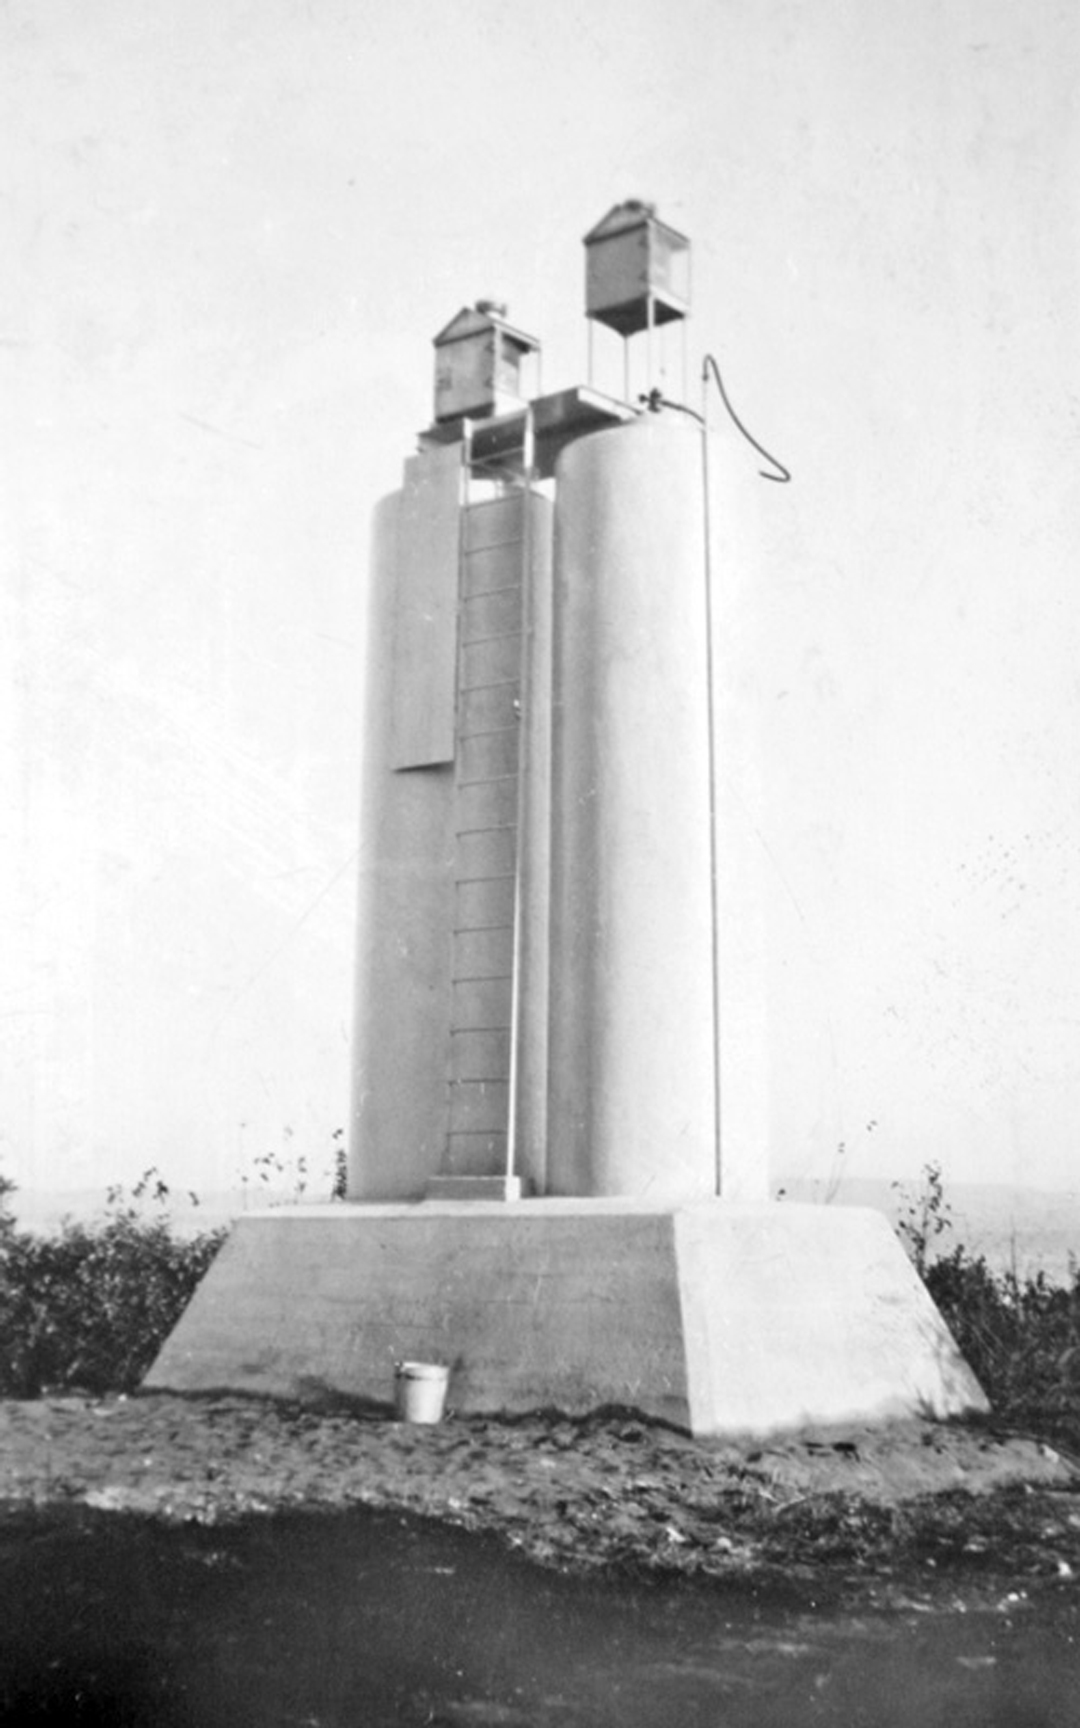 The two automated towers - Source: www.lighthousefriends.com, after 1935